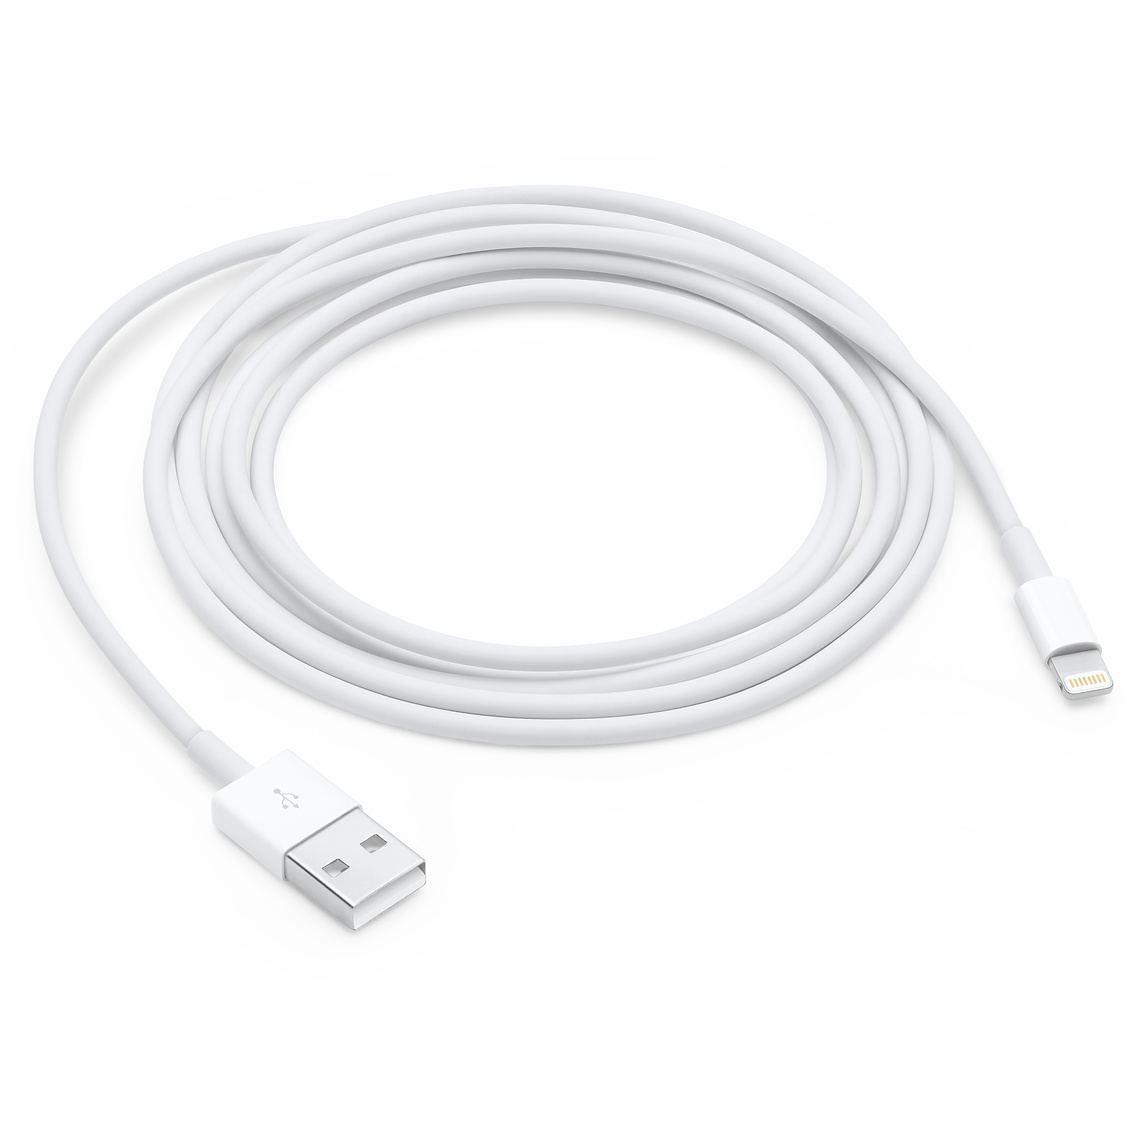 Cable Lightning a USB Apple (2 m)